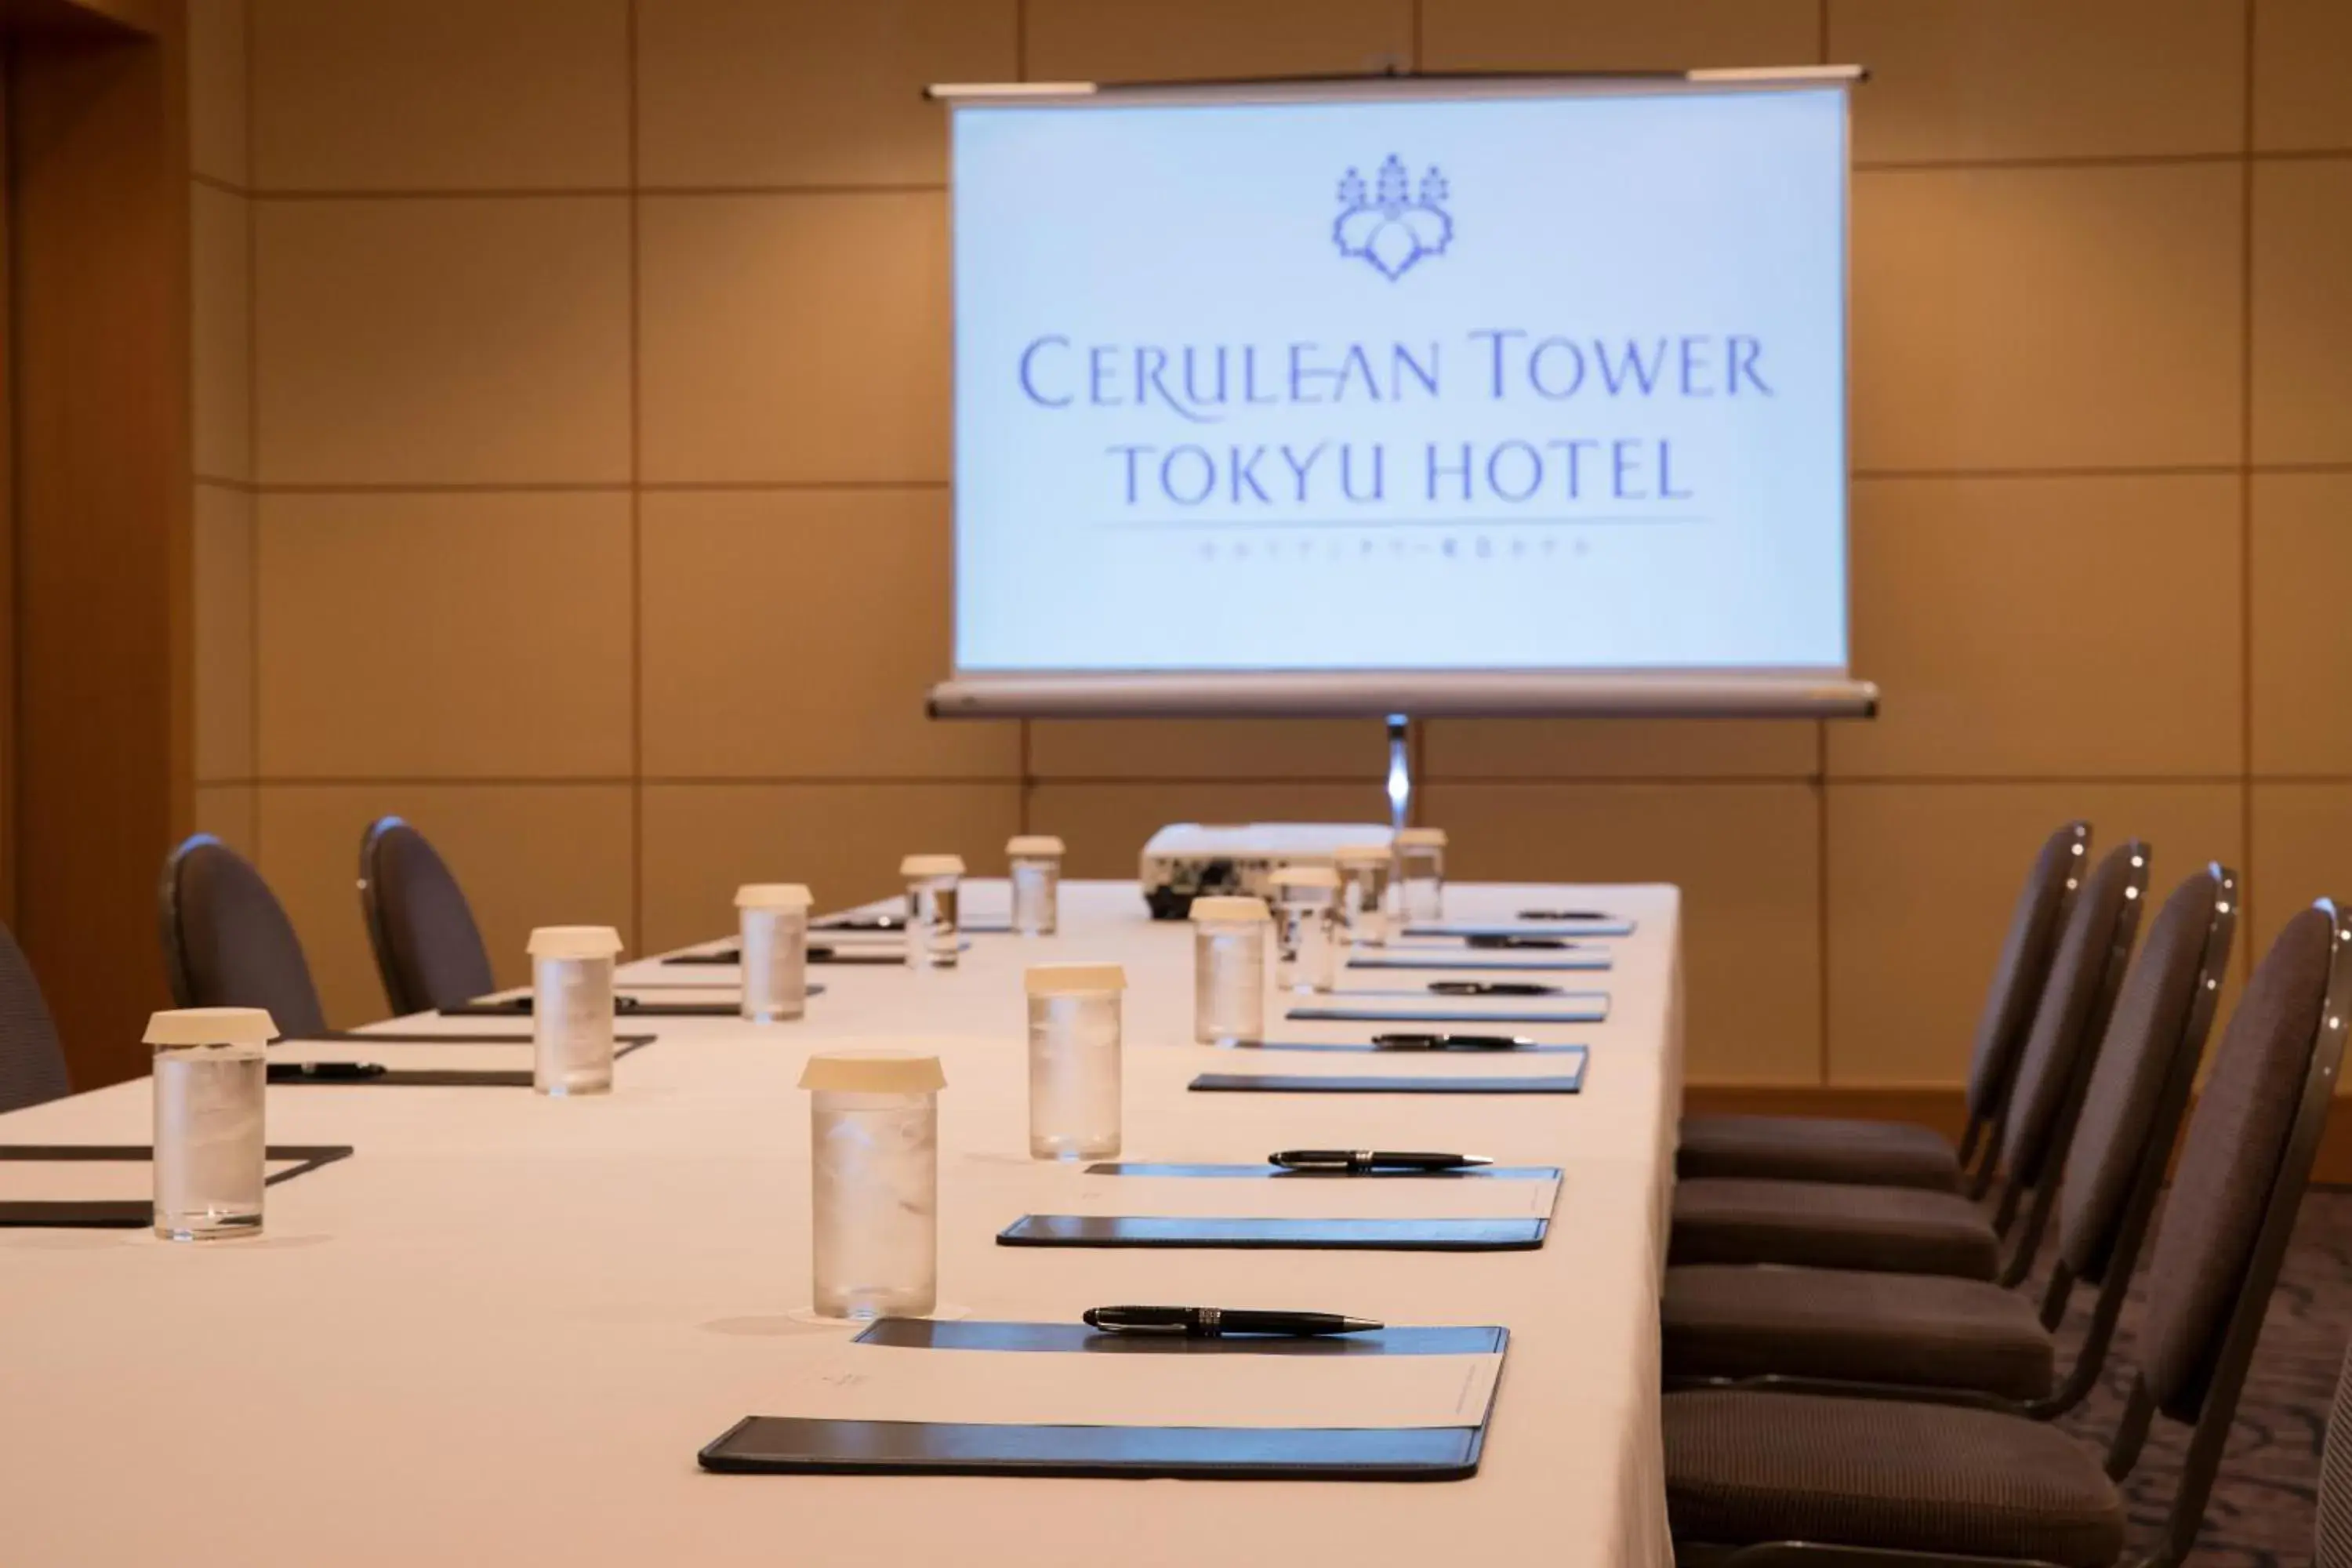 Business facilities in Cerulean Tower Tokyu Hotel, A Pan Pacific Partner Hotel